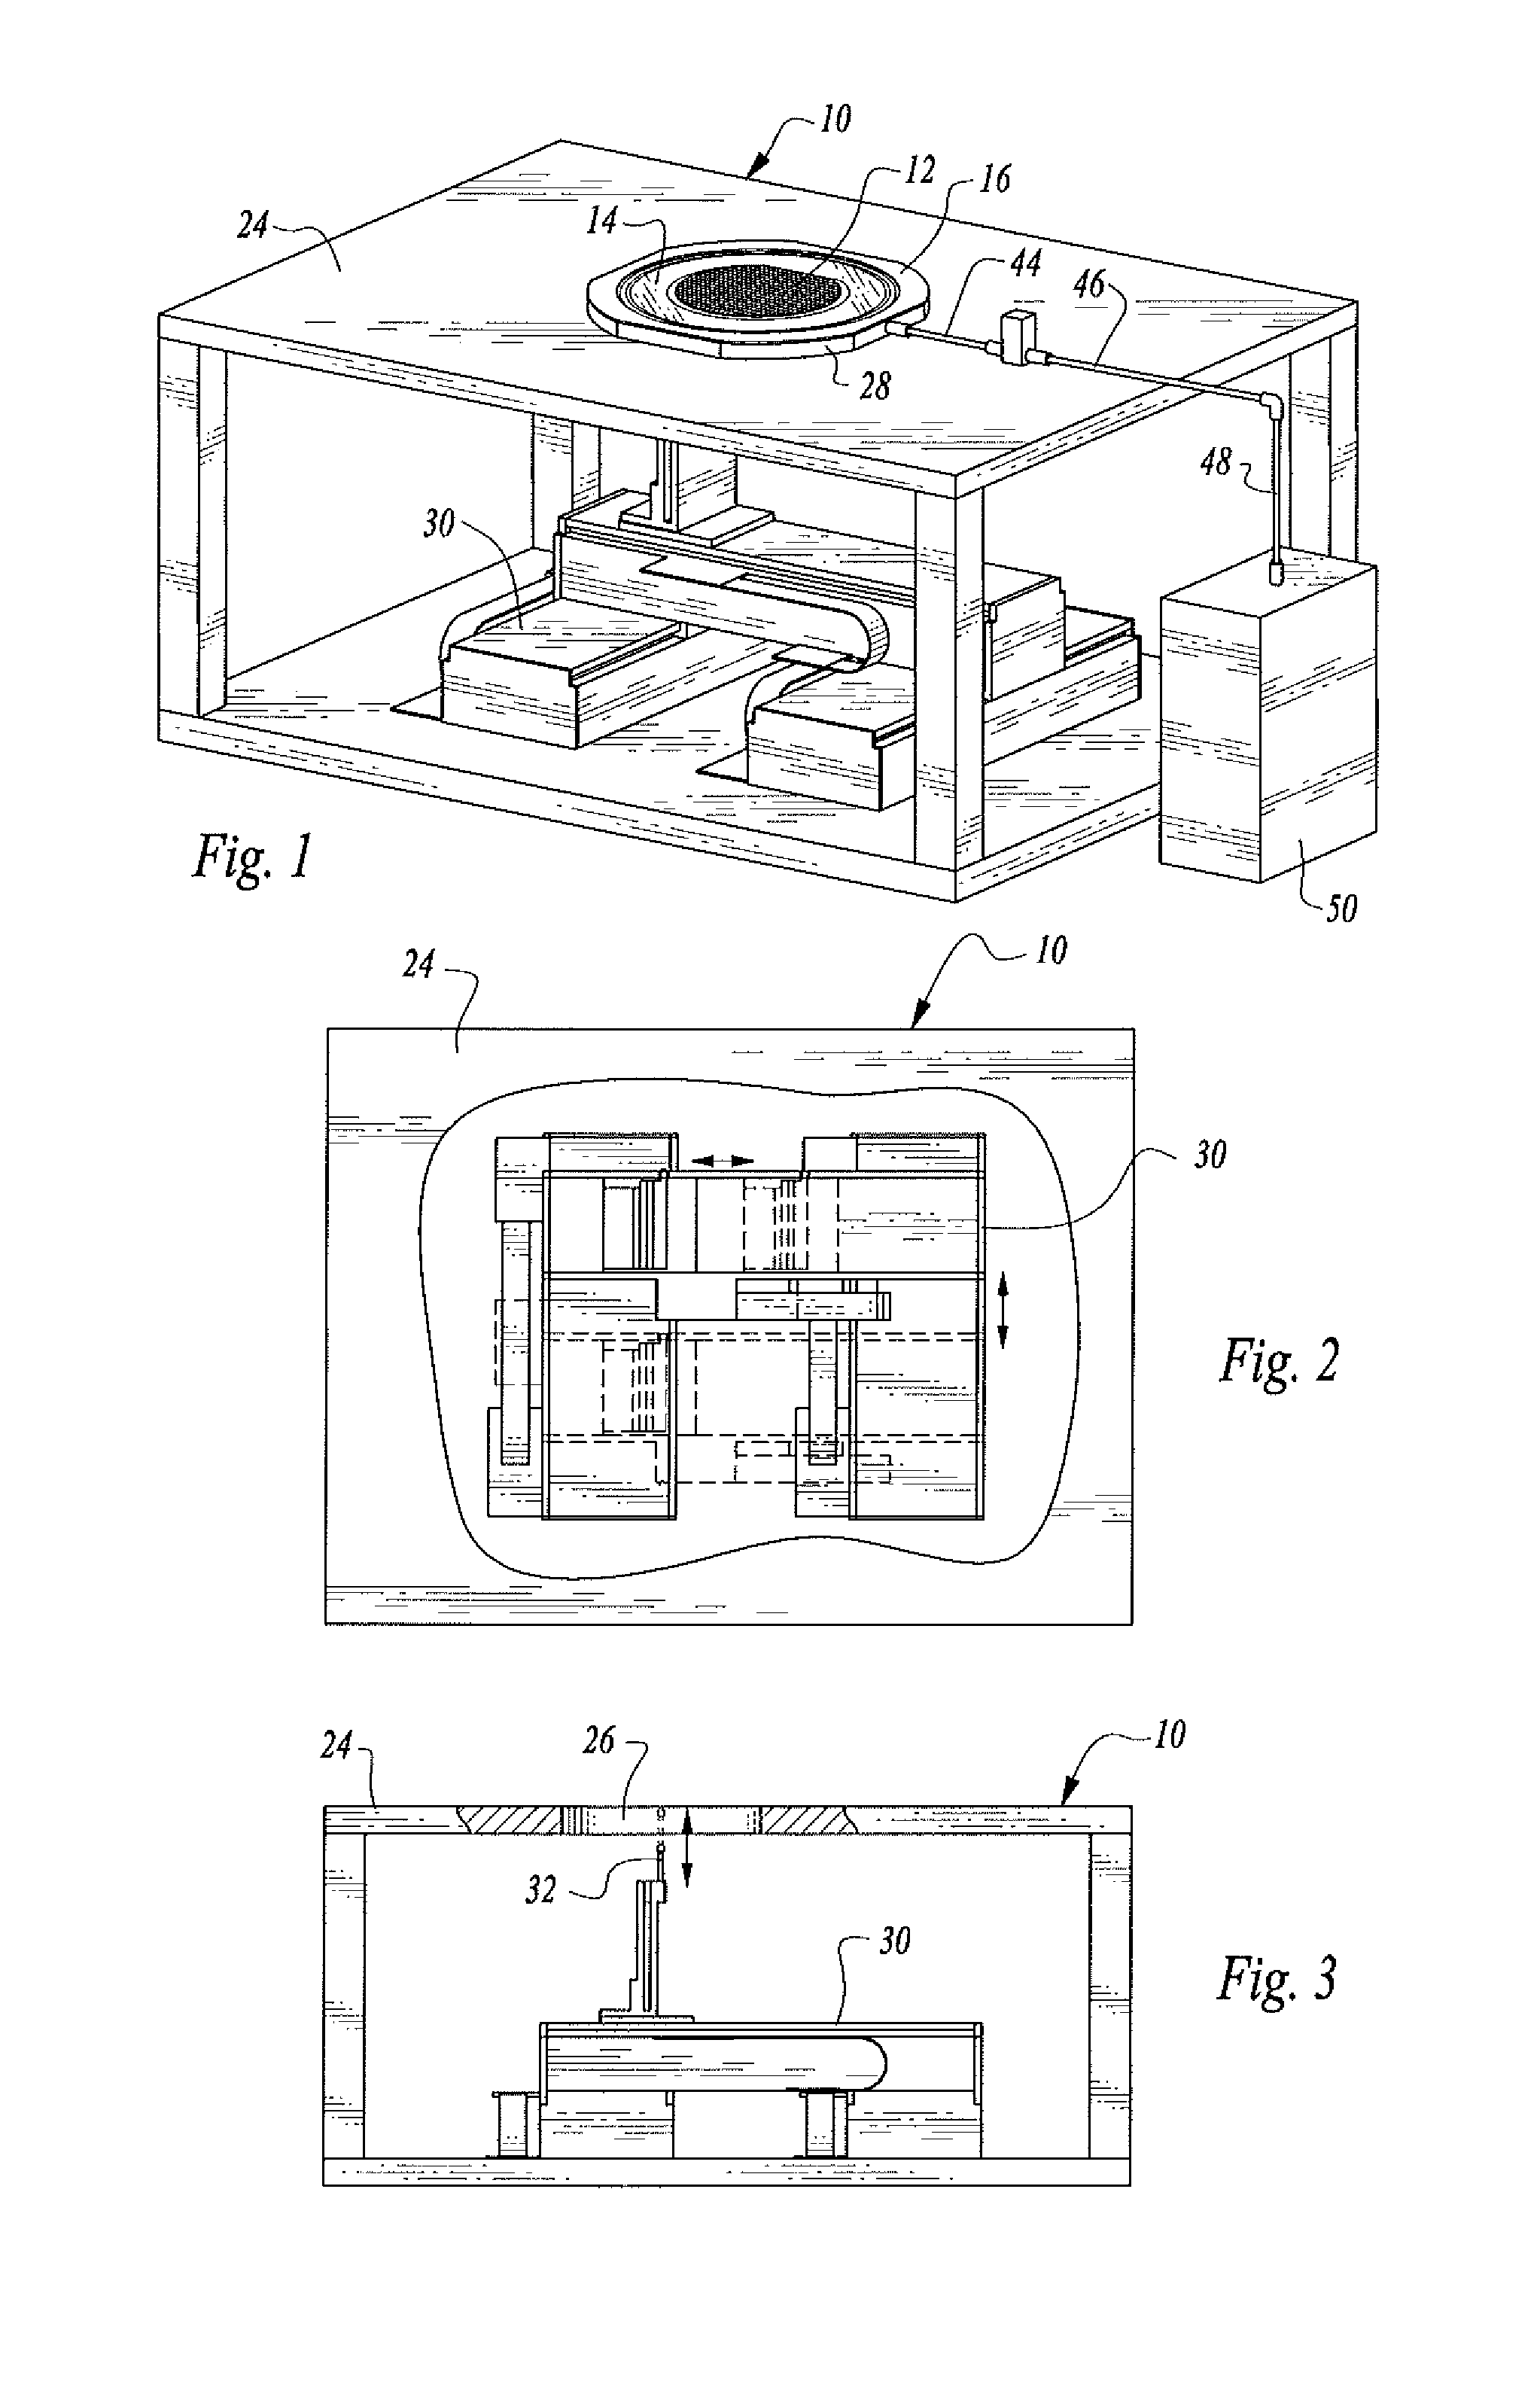 System for separating devices from a semiconductor wafer